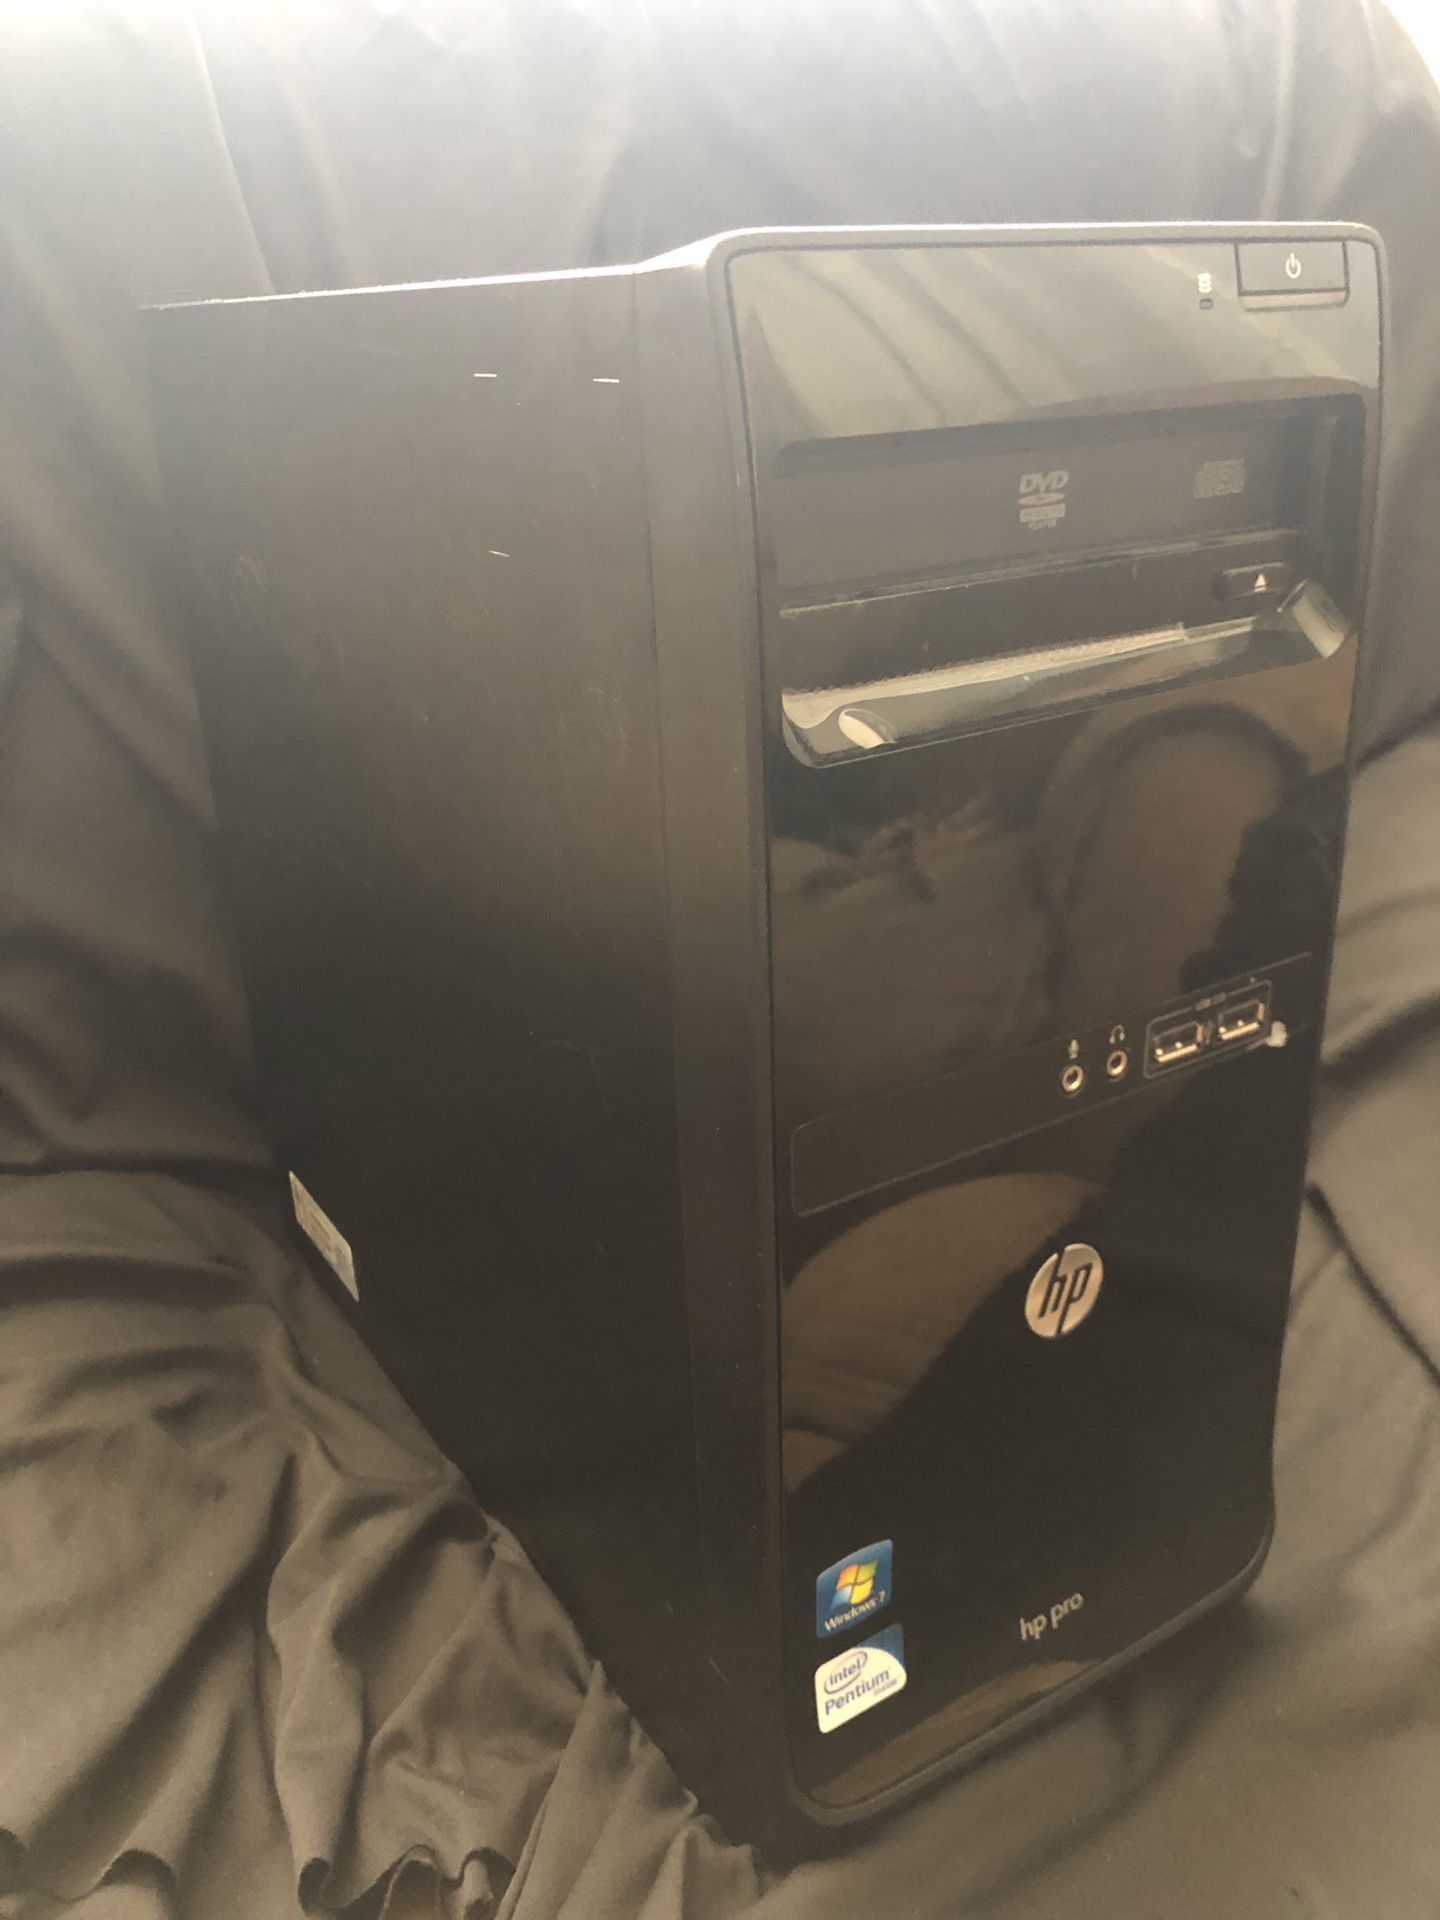 Computer pc tower $70